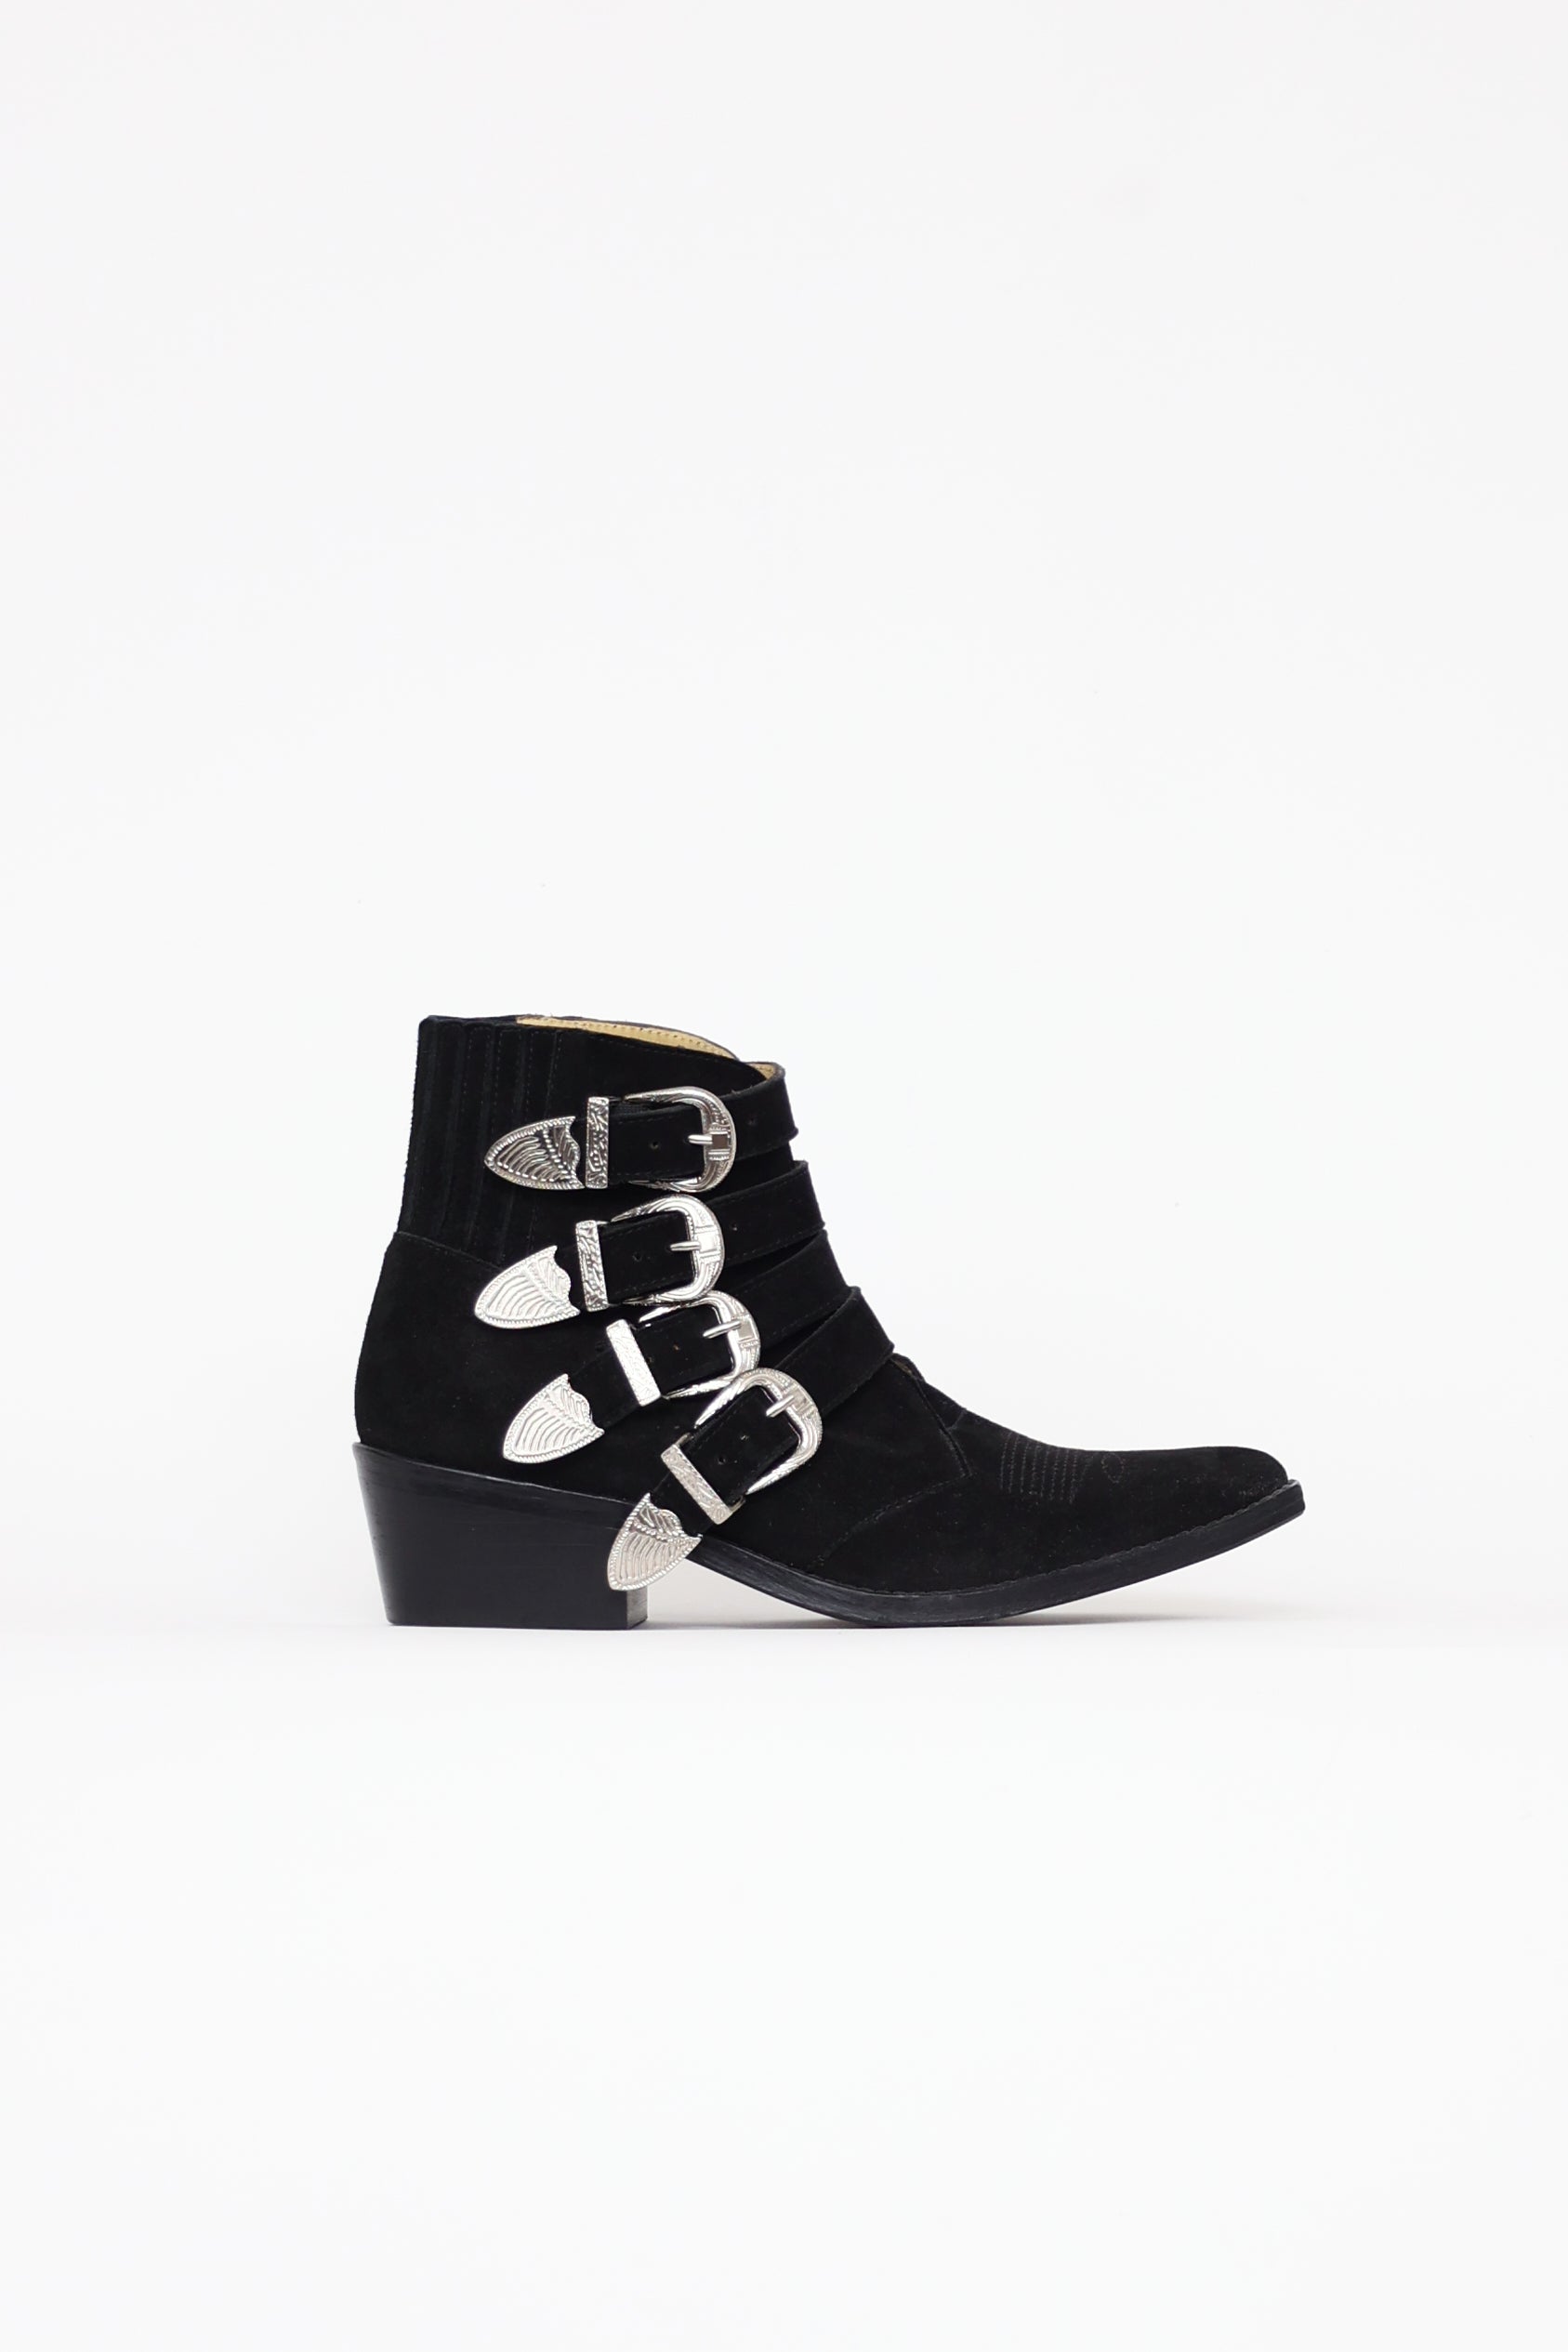 Toga Pulla // Black Suede Buckle Boots – VSP Consignment